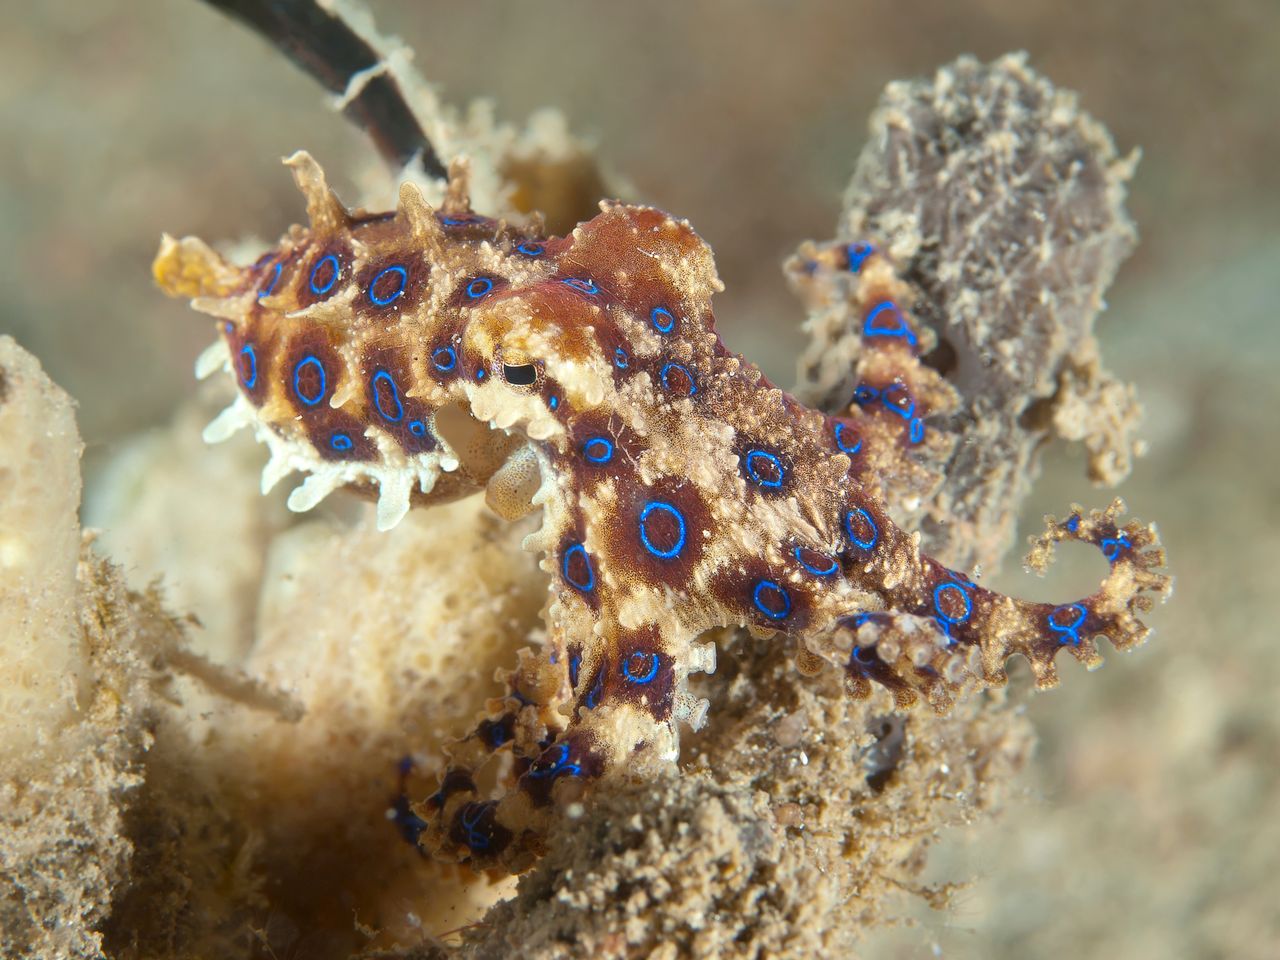 Teen's beach shell collection turns deadly as venomous blue-ringed octopus strikes, narrowly averts tragedy